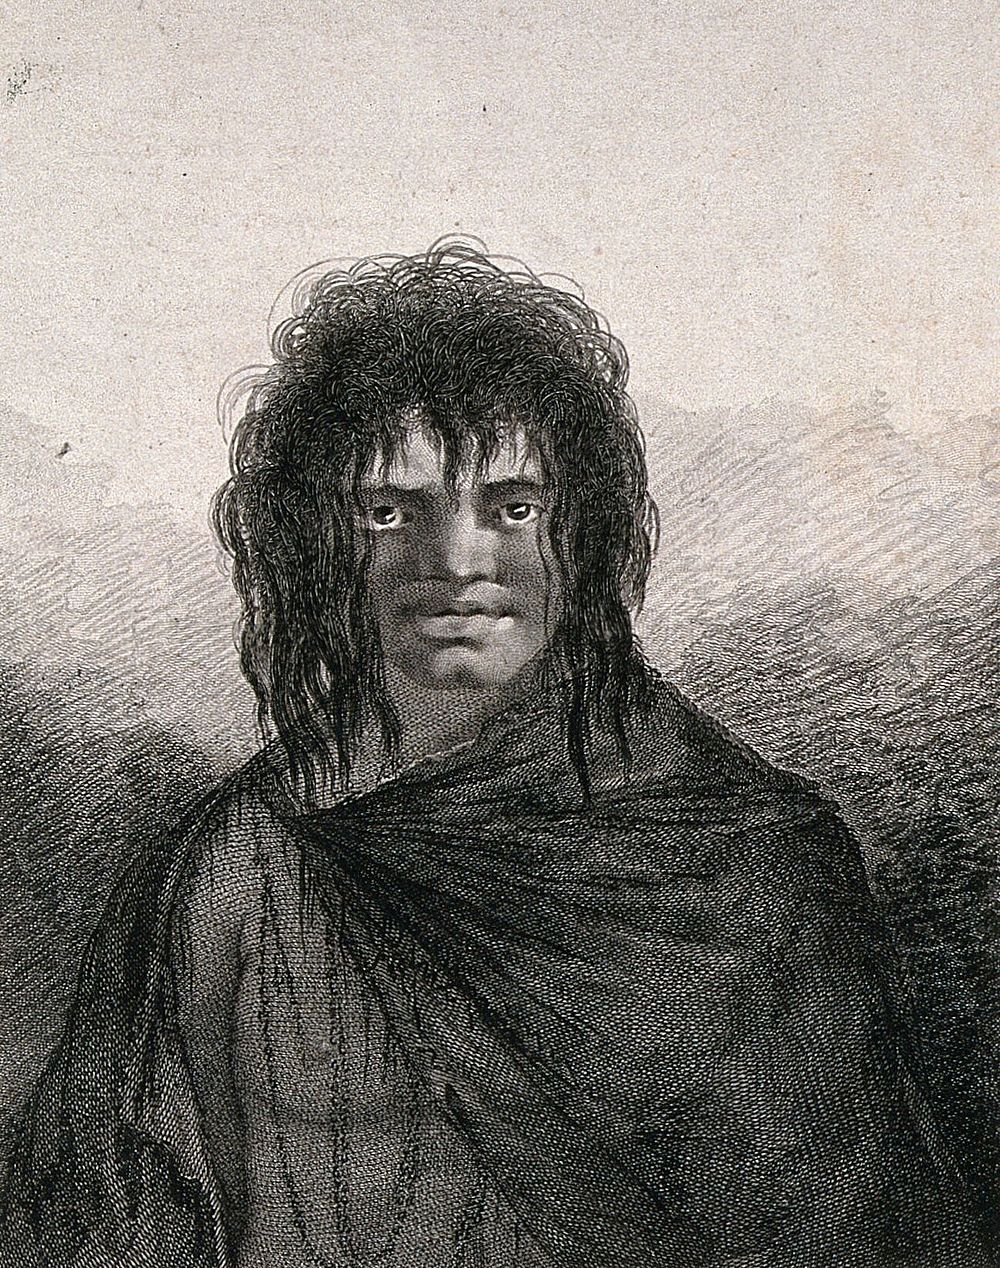 A man from Tierra del Fuego encountered by Captain Cook on his second voyage. Engraving by J. Basire, 1777, after W. Hodges.